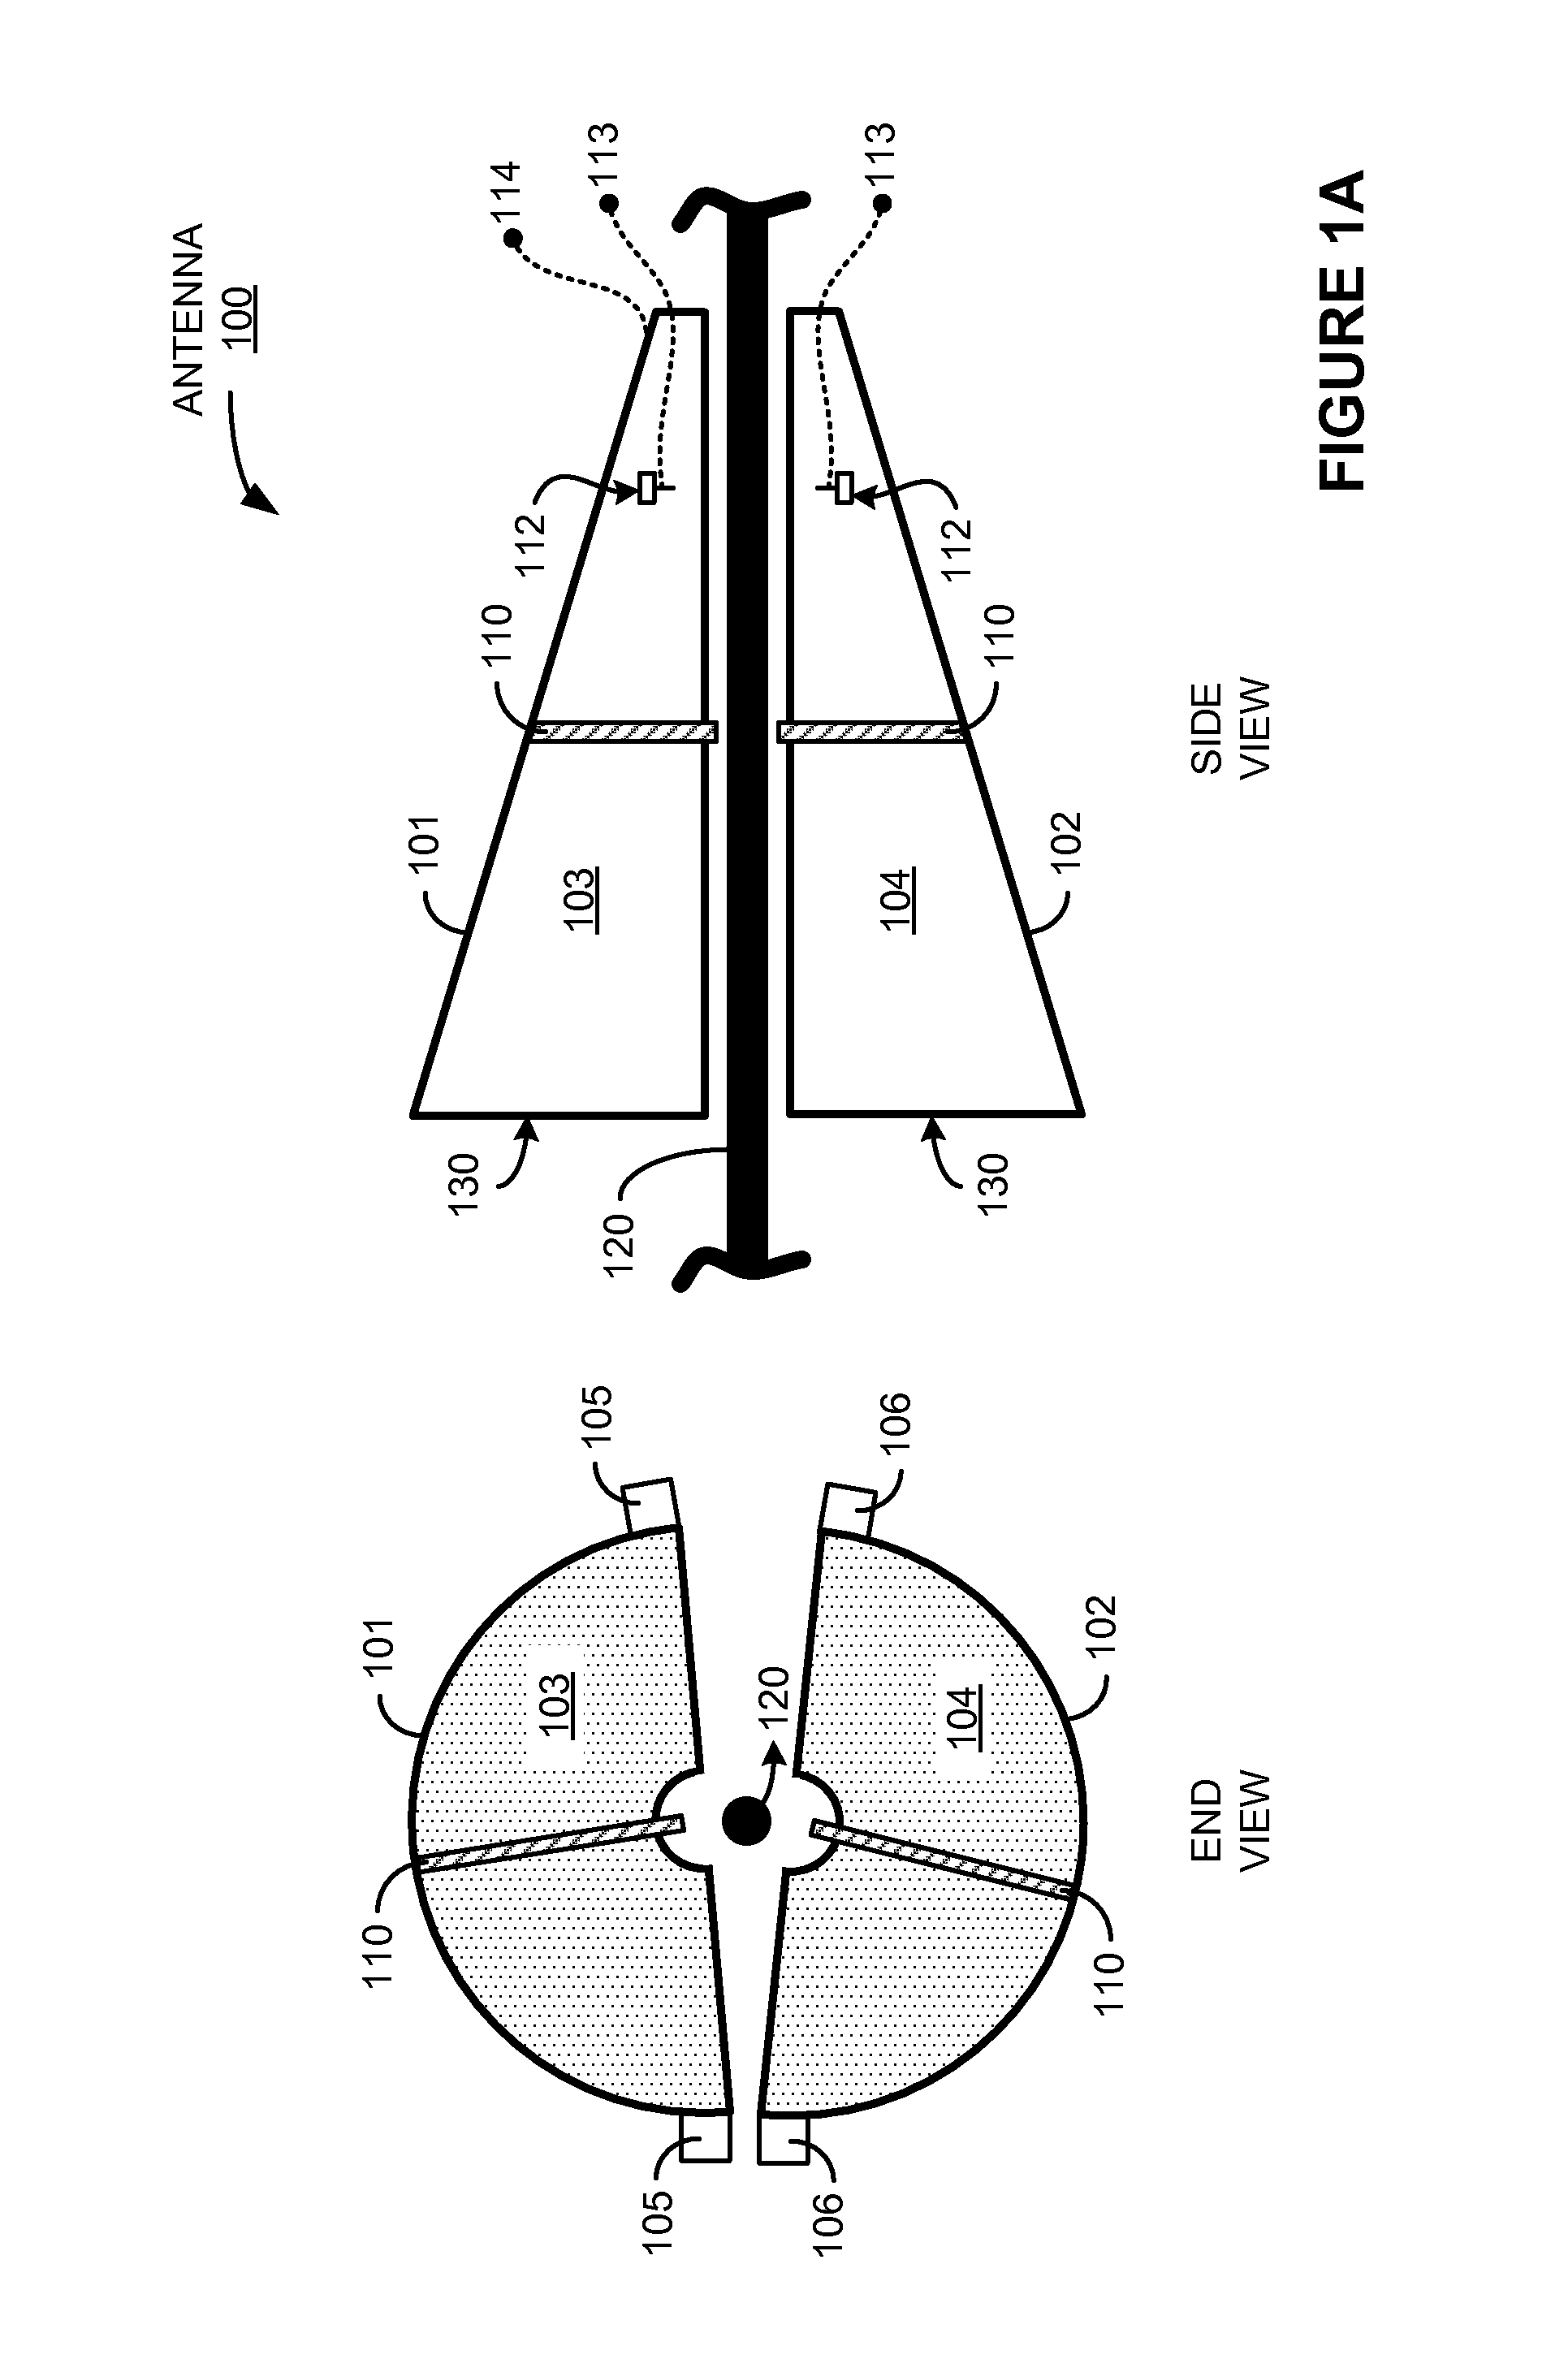 Surface wave antenna mountable on existing conductive structures